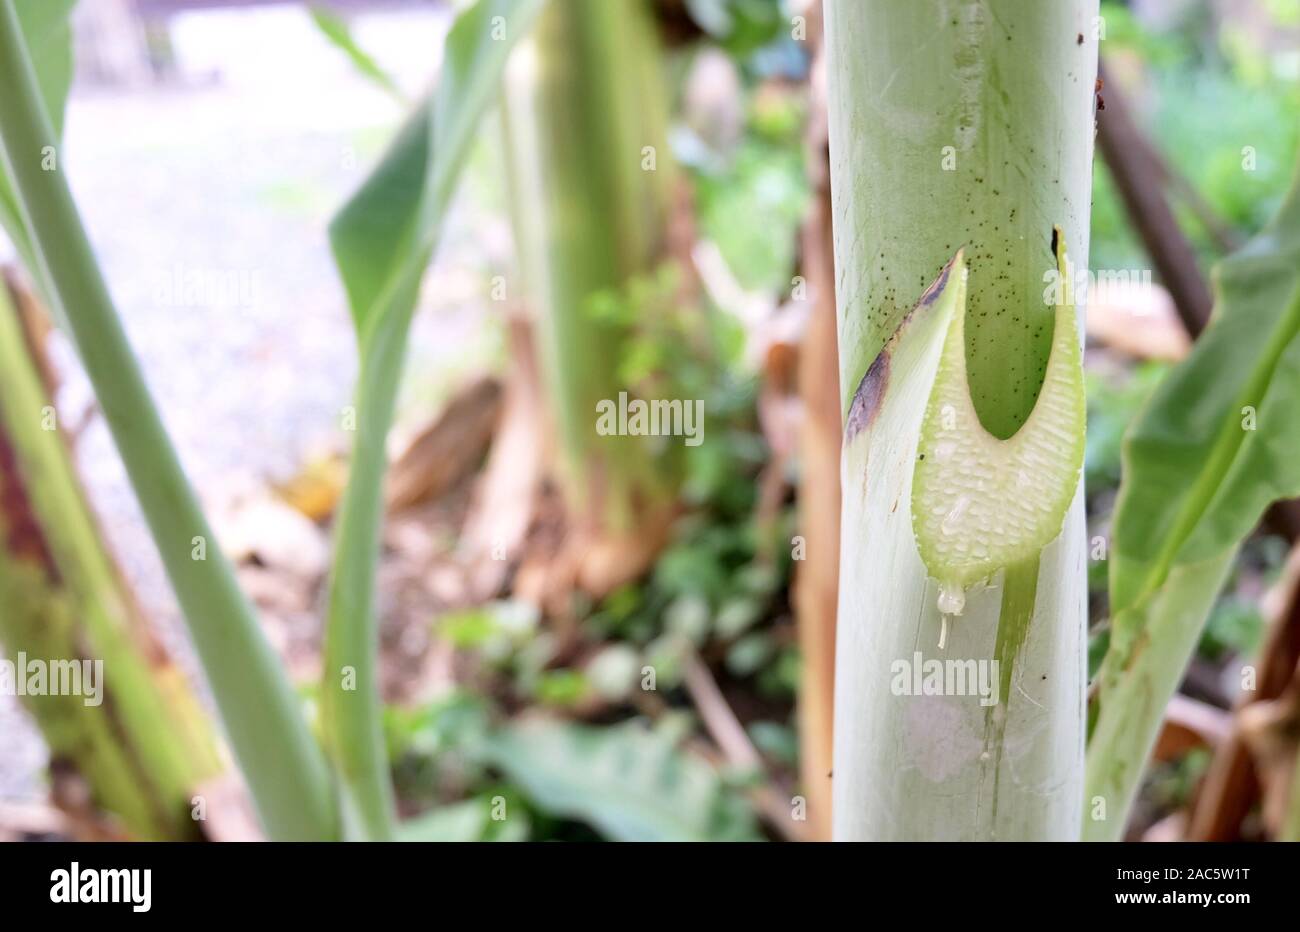 Banana Sap Droping From The Flesh of Banana Tree Trunk. Usually Used as A Practical Adhesive. Stock Photo